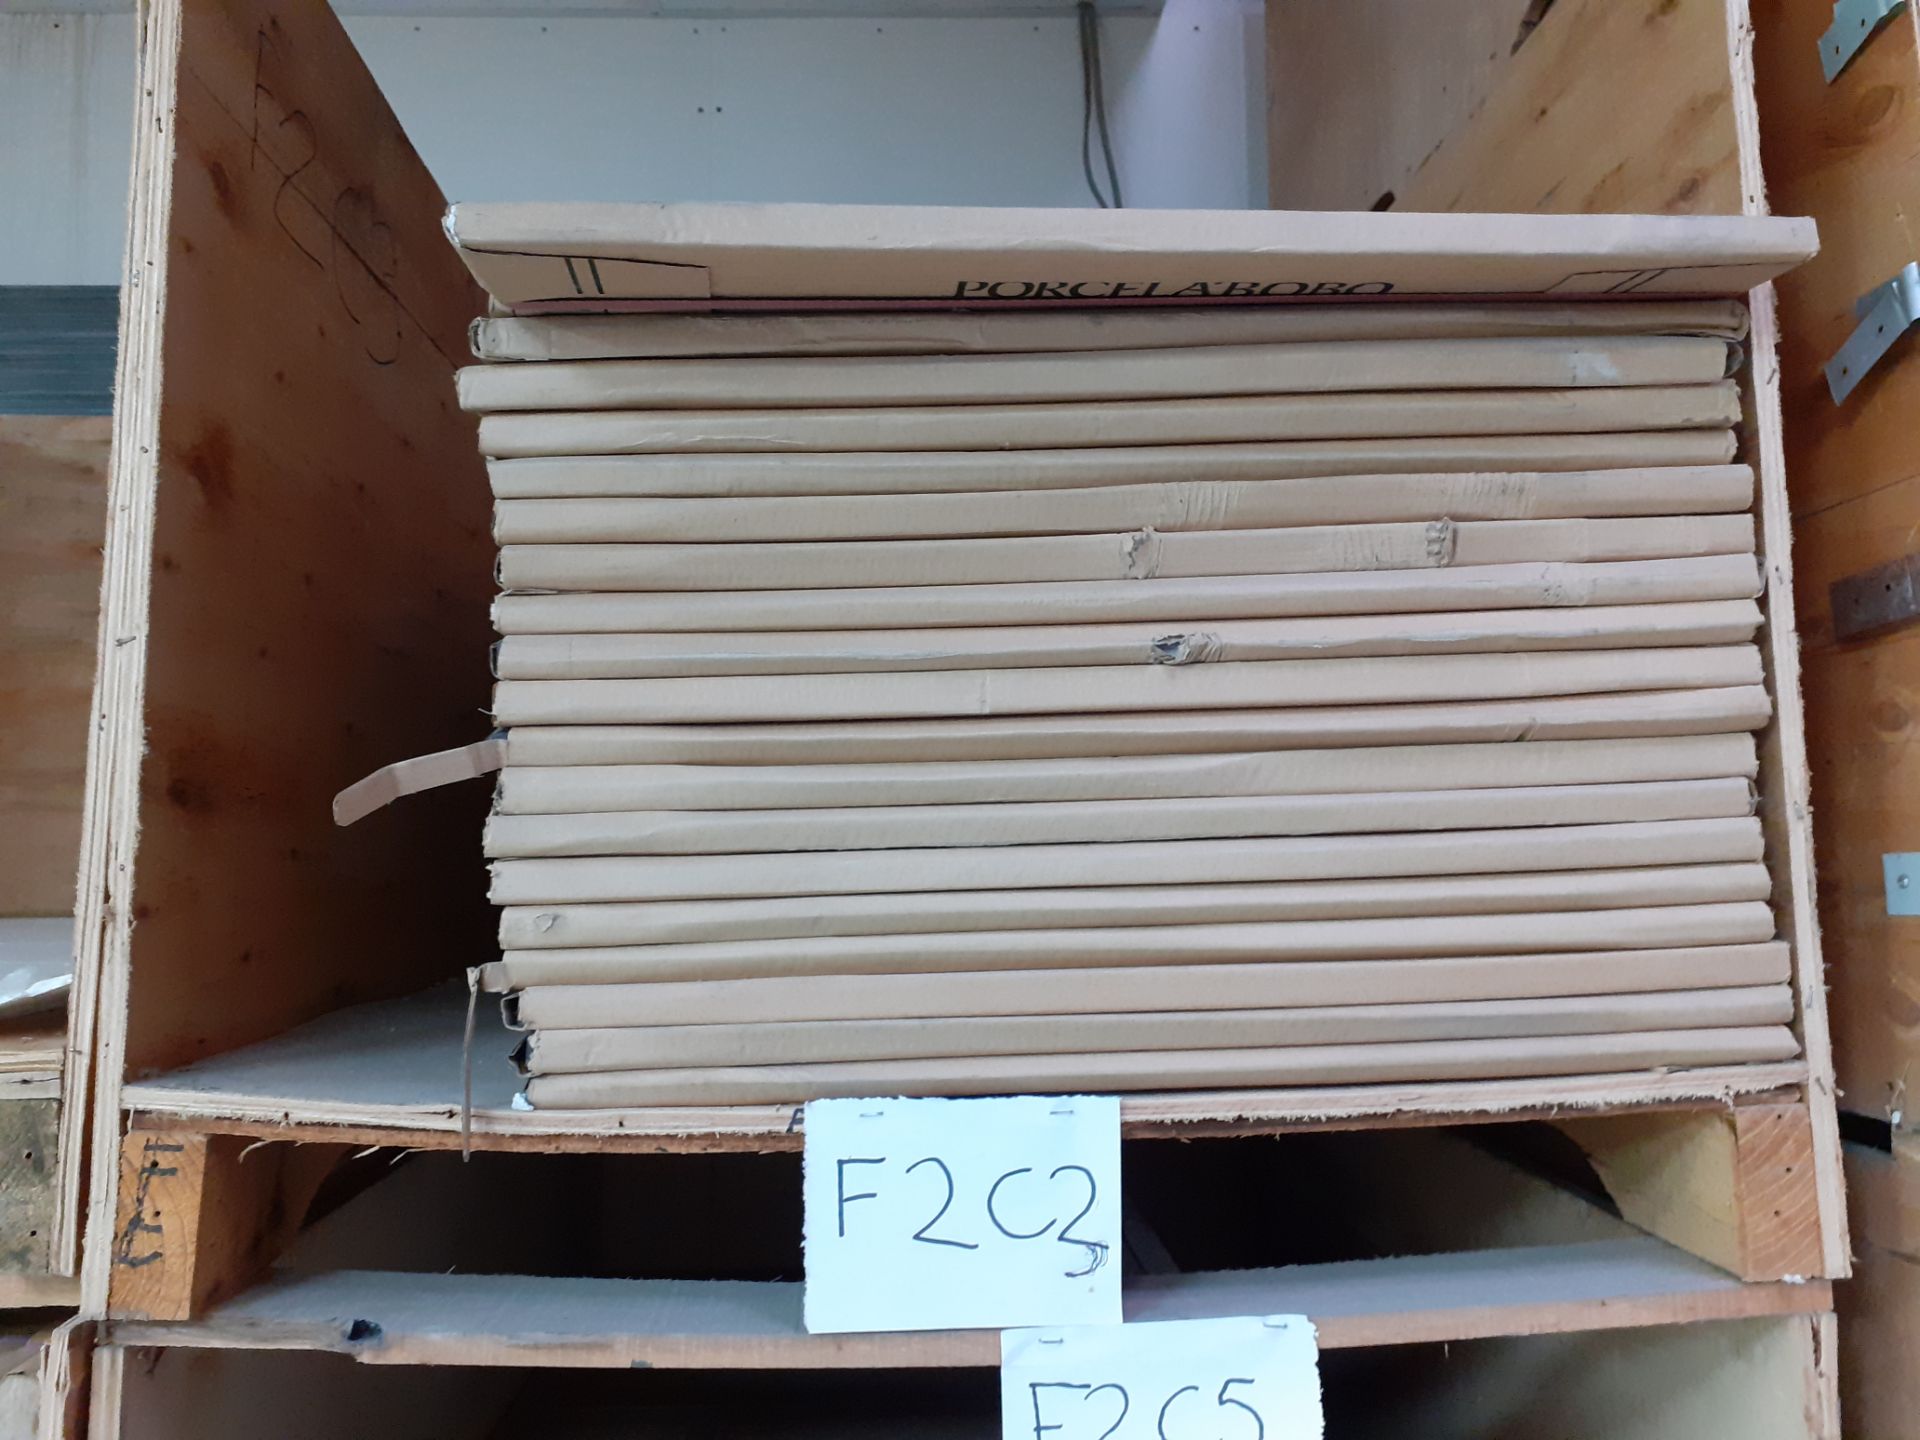 17 boxes x 3 of F8C4 Tiles 600x1200x4.8mm, 18 boxes x 3 of F2C5 Tiles 600x1200x4.8mm & 19 boxes x - Image 3 of 6